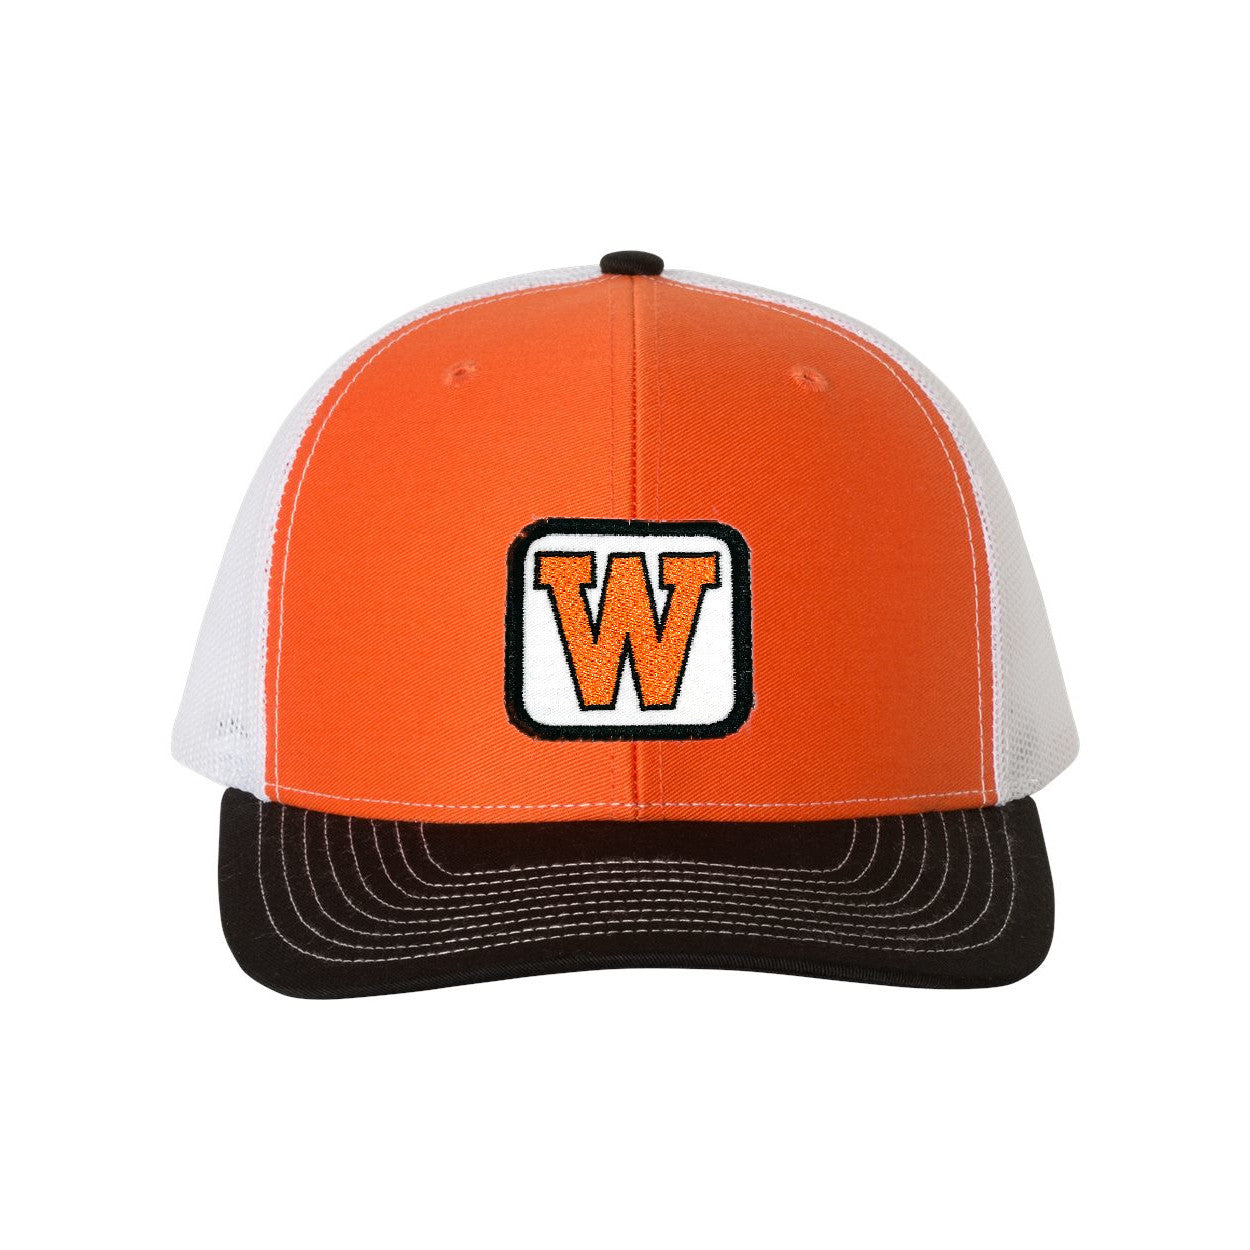 Black Orange and White 6 panel with Gray Mesh | West De Pere Patched Snapback Mid-Profile Trucker Hat